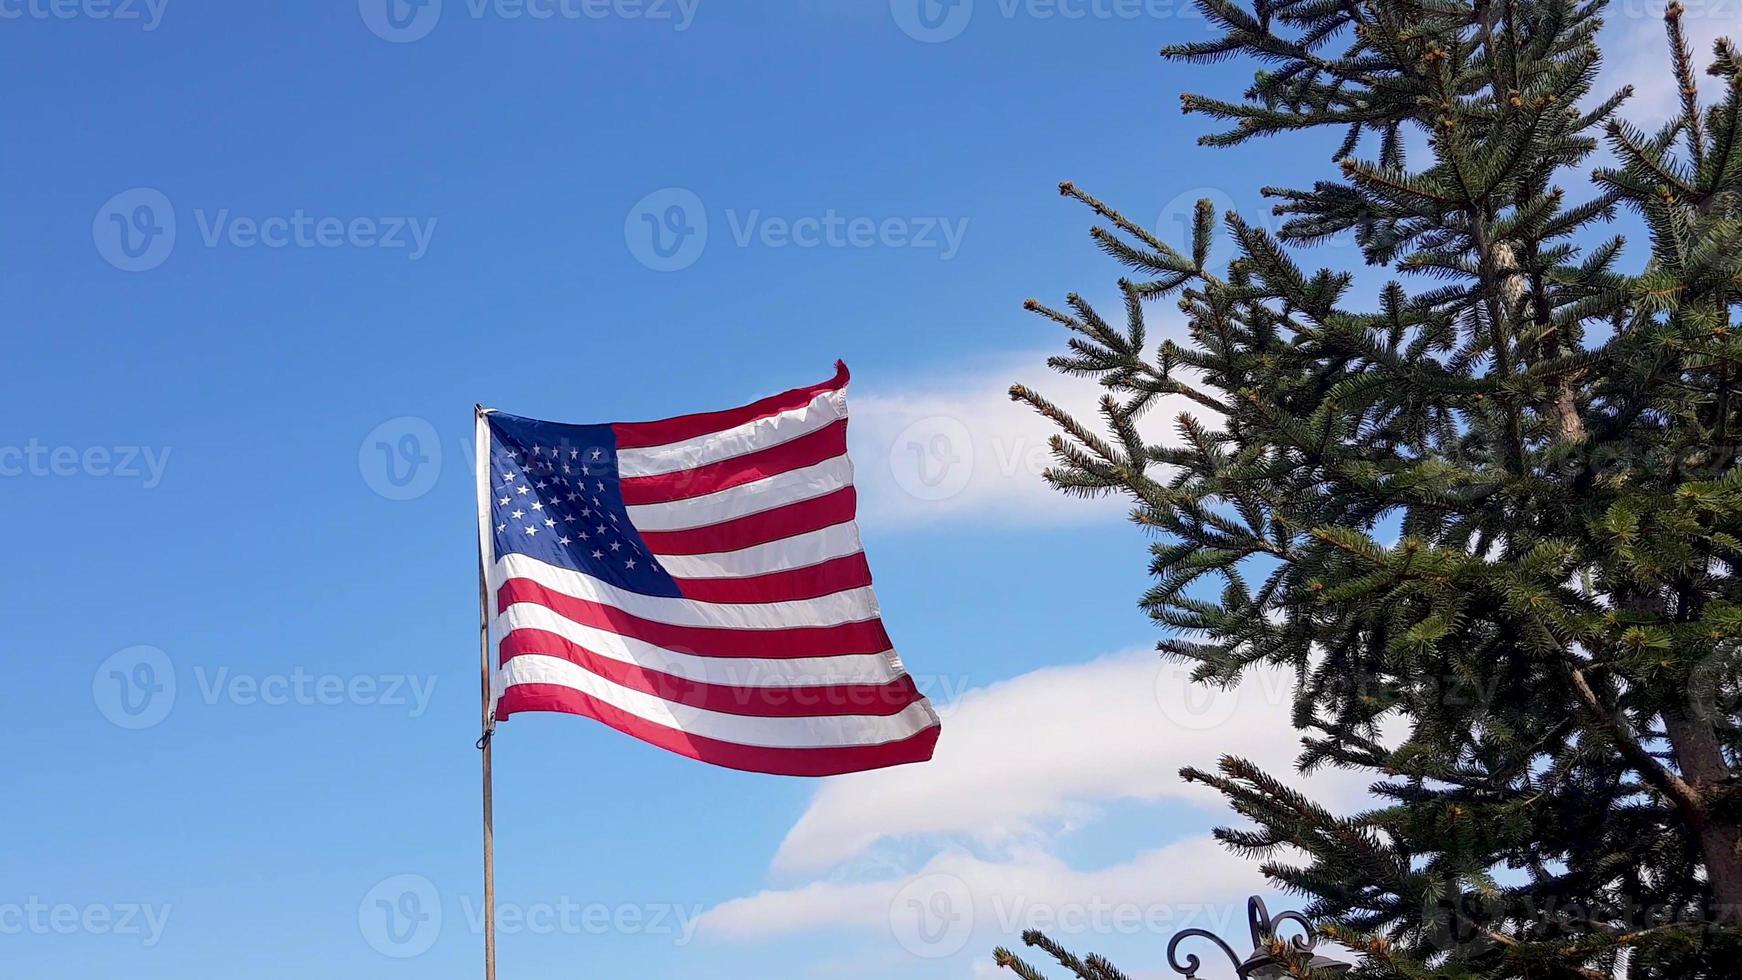 American Flag blowing in the wind with a blue sky background. USA American Flag. Waving United states of America famous flag in front of blue sky and green pine. Memorial Day - American concept. photo